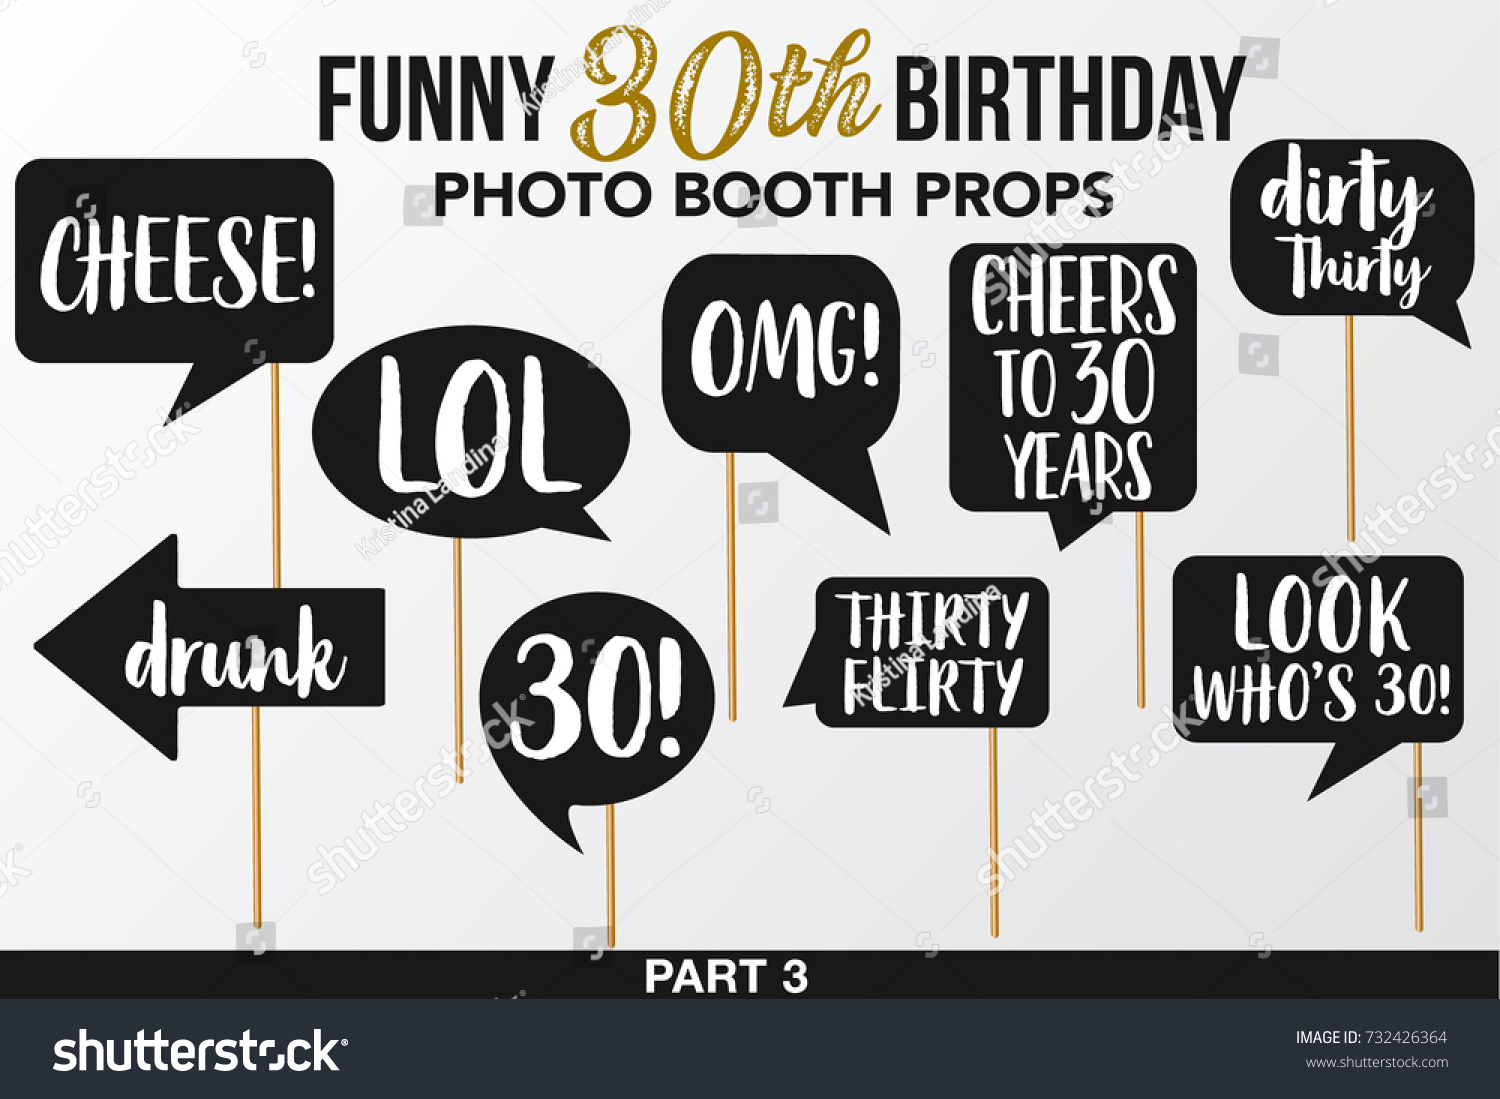 SVG of Set of Funny Thirty Birthday photobooth Vector Props.Black color with golden glitter elements and signs Lol, Hot Mess, Drunk, Cheers, OMG, Thirty Flirty, Look who is, Dirty, Cheese on sticks. Part 3. svg